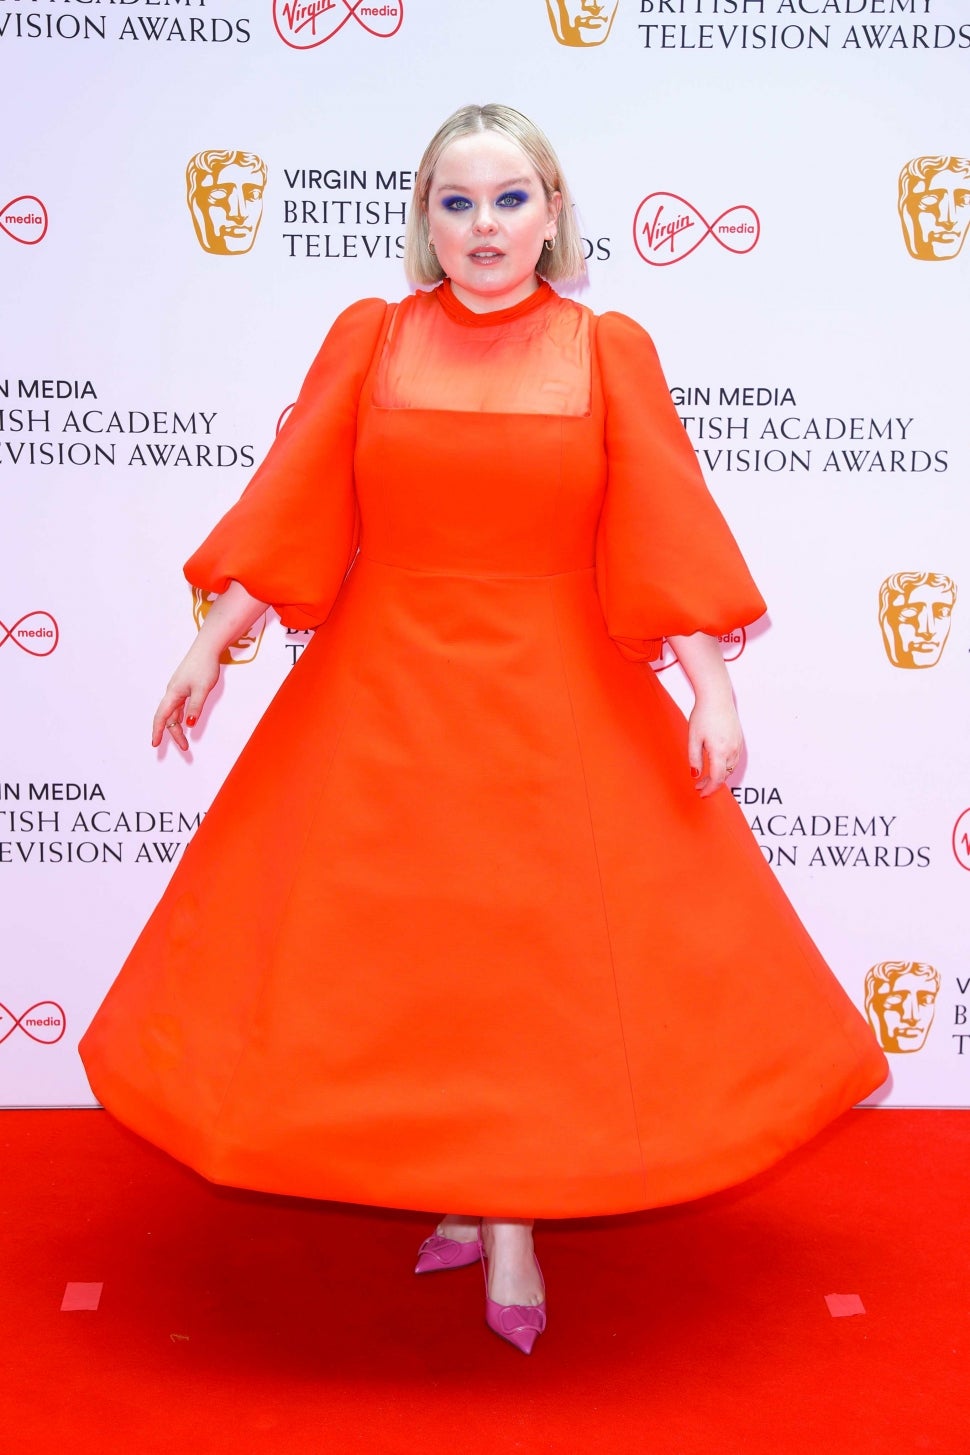 Nicola Coughlan attends the Virgin Media British Academy Television Awards 2021 at Television Centre on June 06, 2021 in London, England.